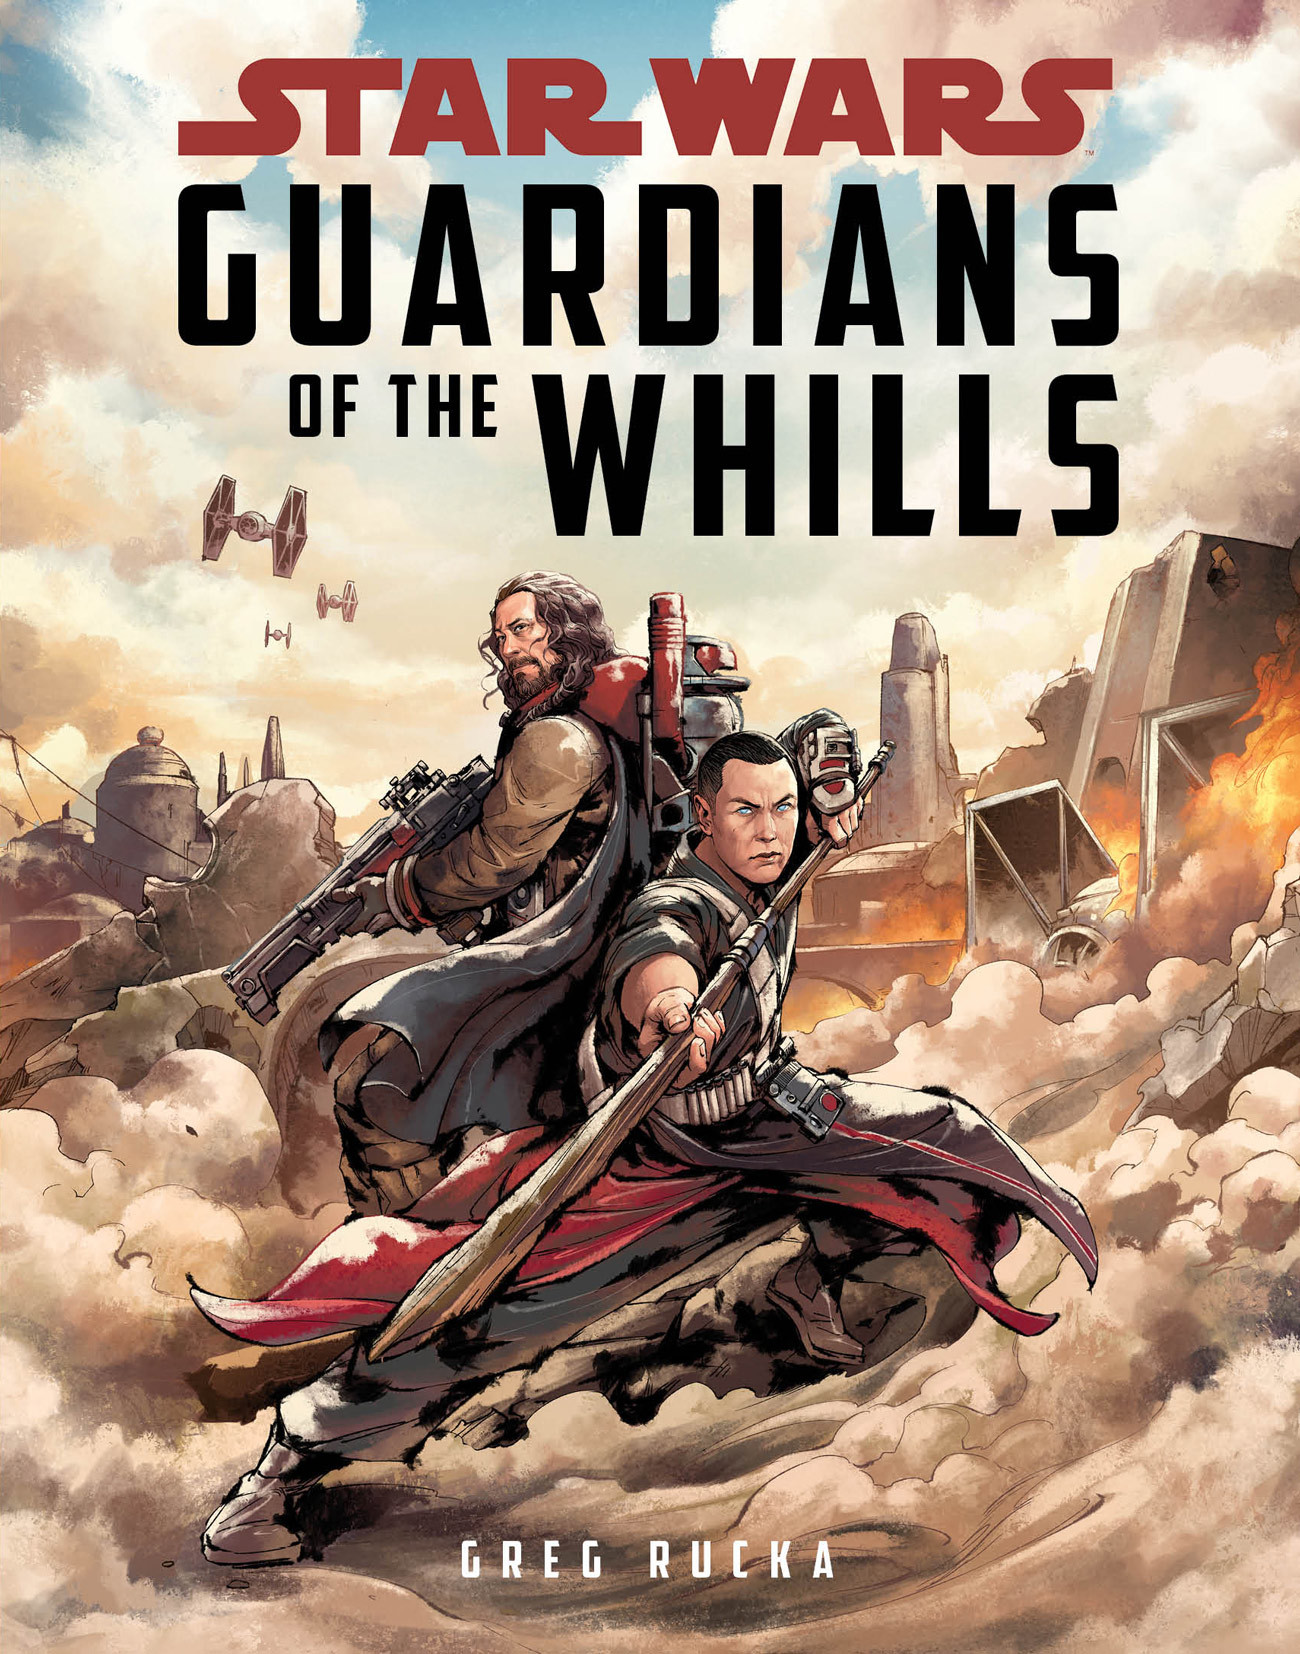 Greg Rucka: Star Wars: Guardians of the Whills (2017)